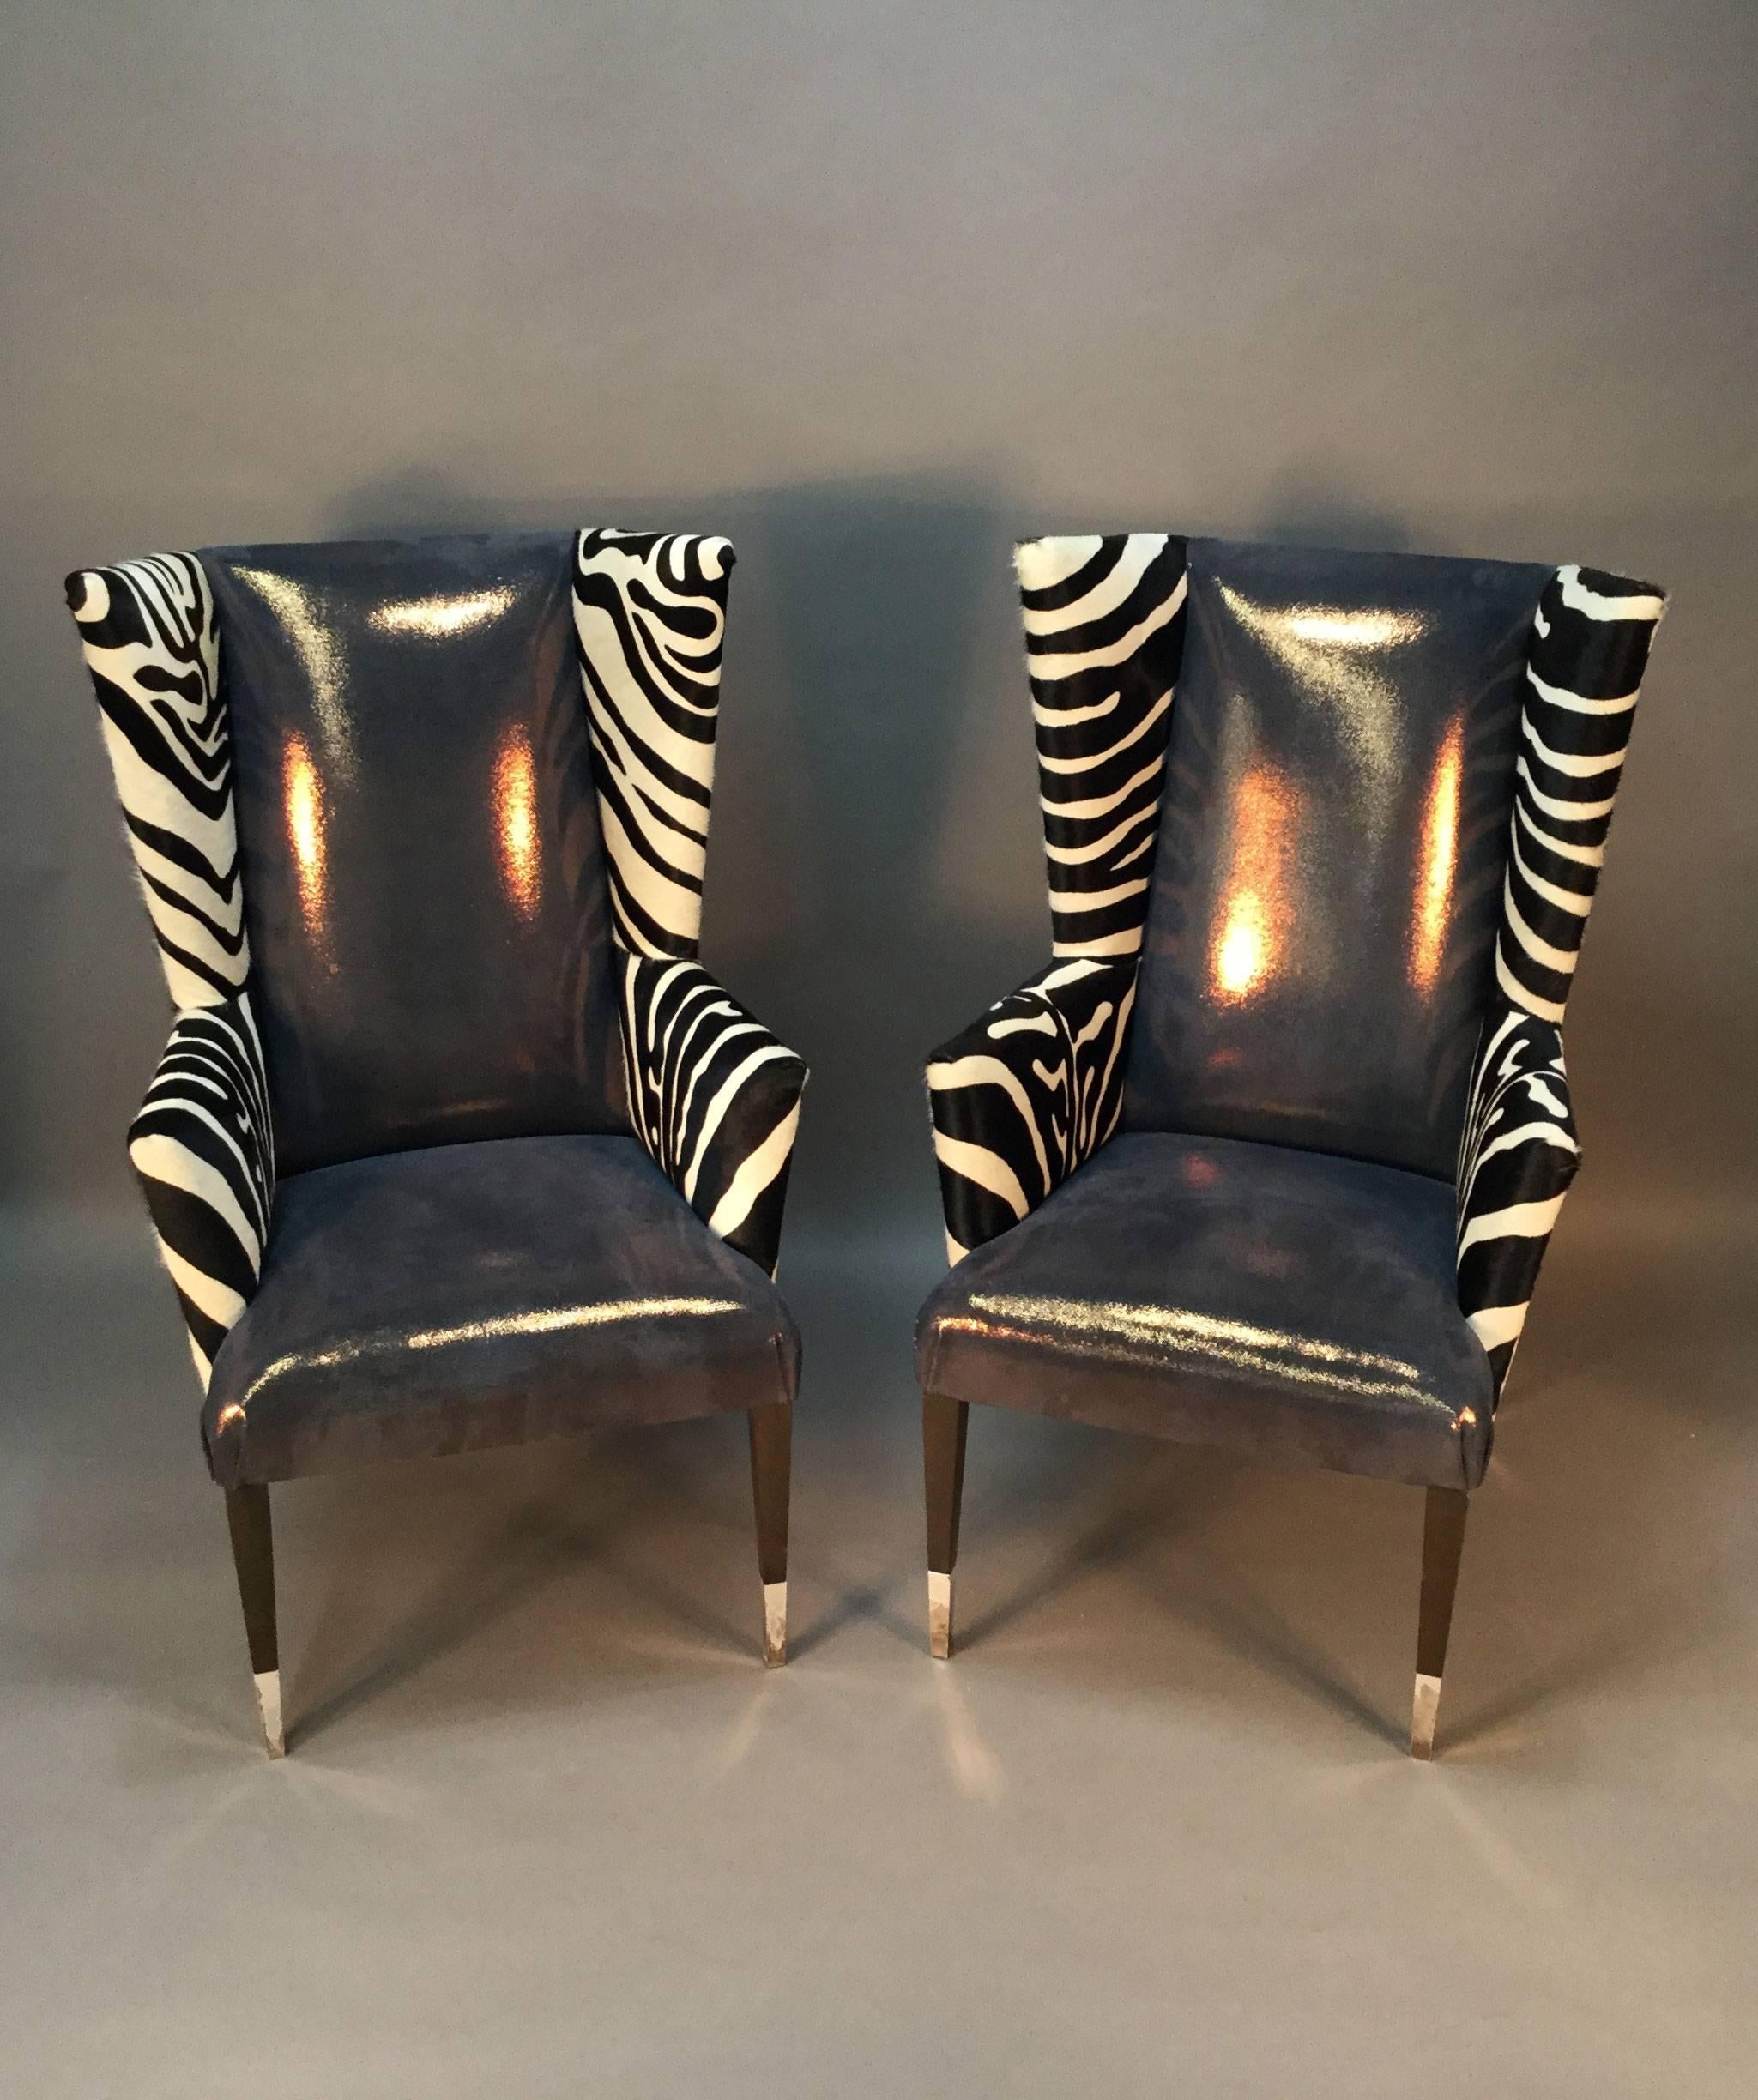 Late 20th Century Pair of Modern Wingback Chairs in Zebra Printed Cowhide and Faux Shagreen